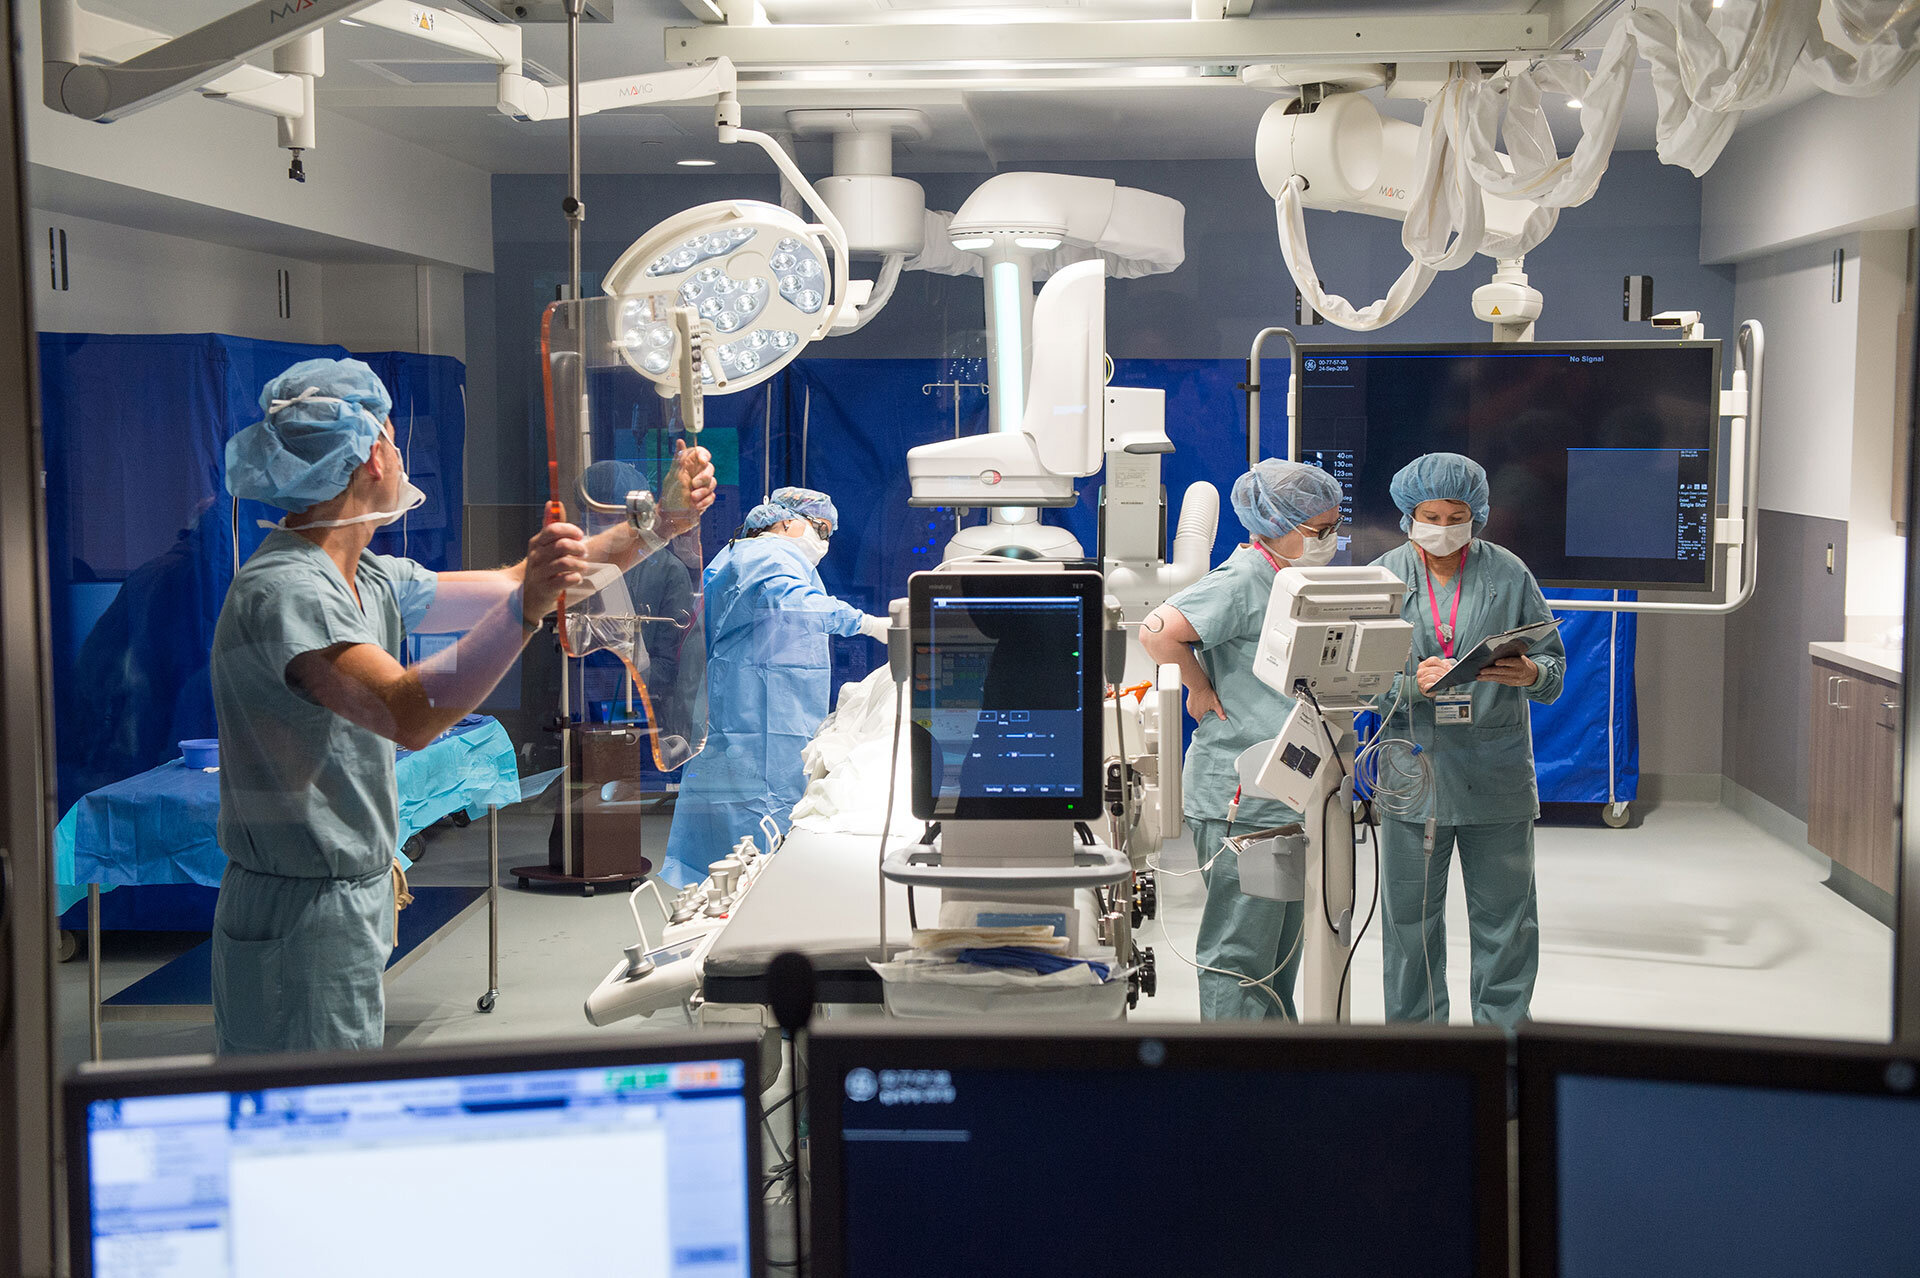 OUR OUTPATIENT BASED INTERVENTIONAL LAB